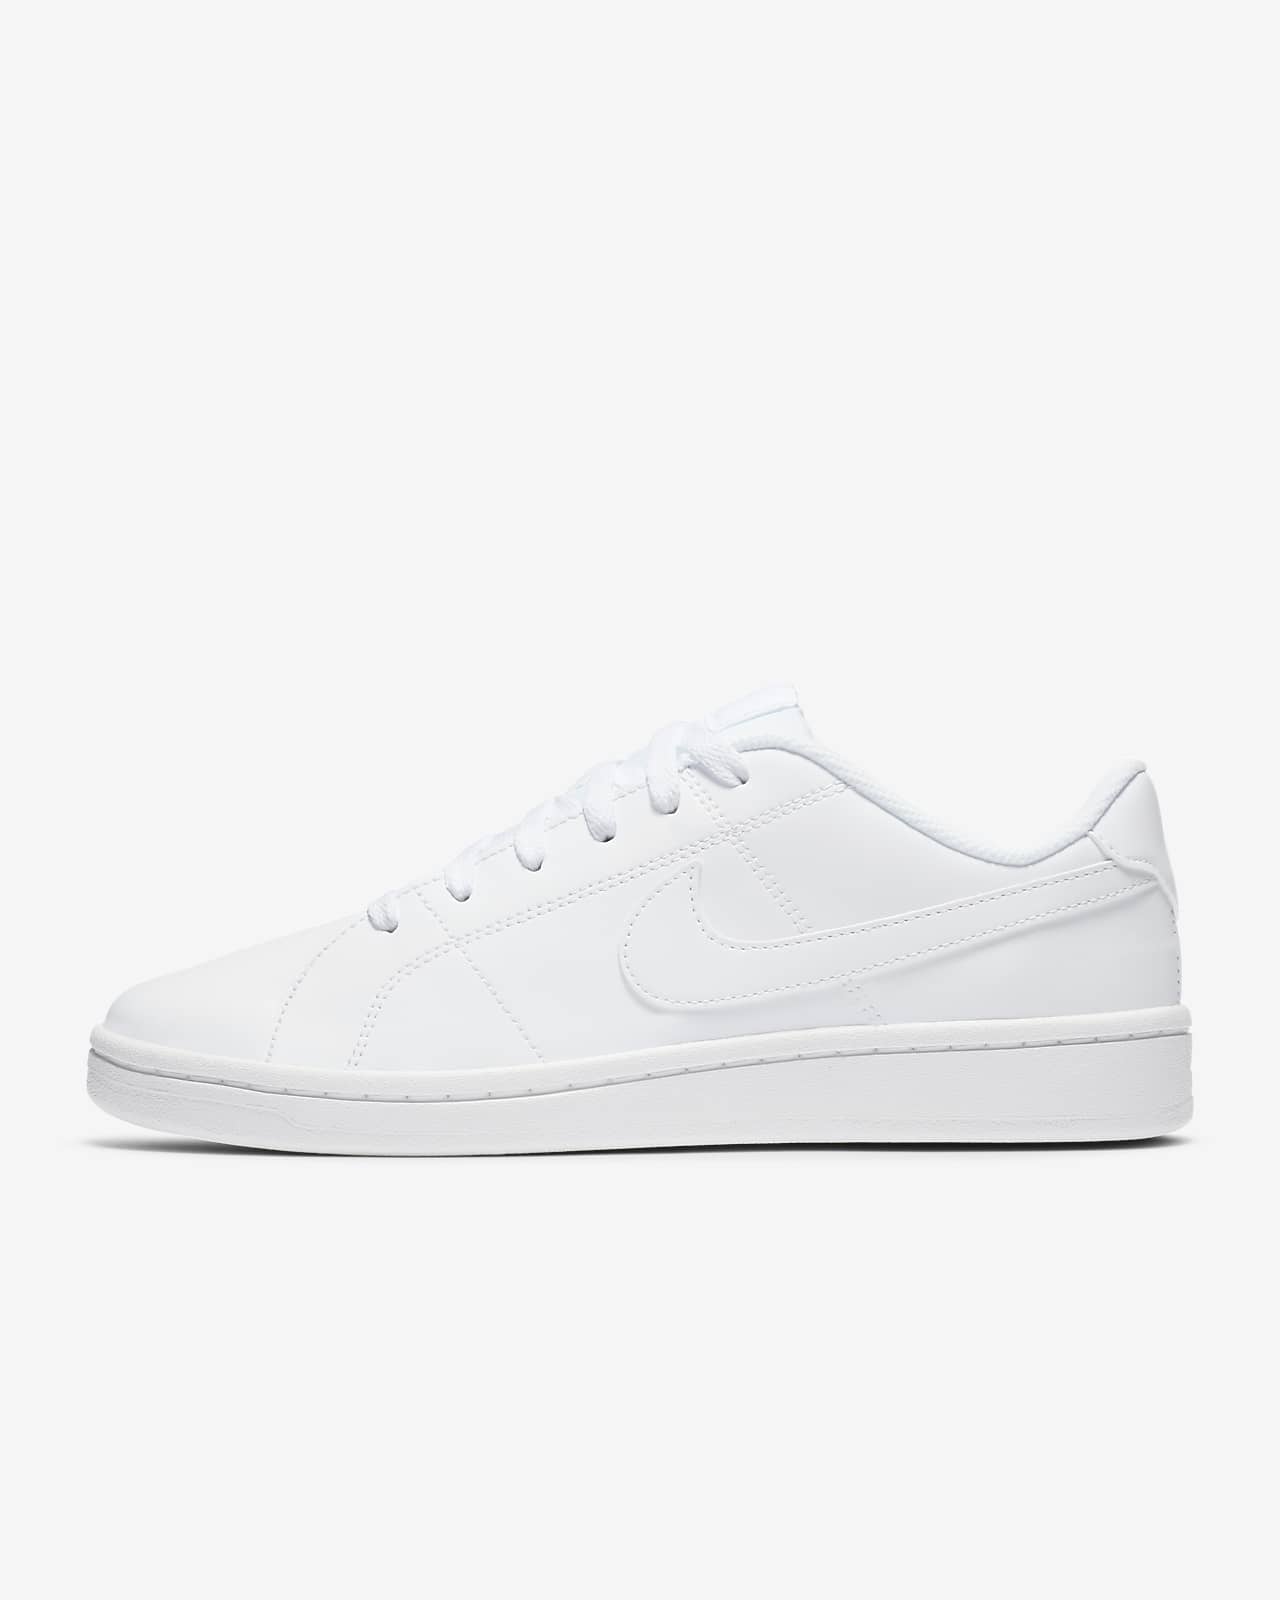 nike court royale white and blue